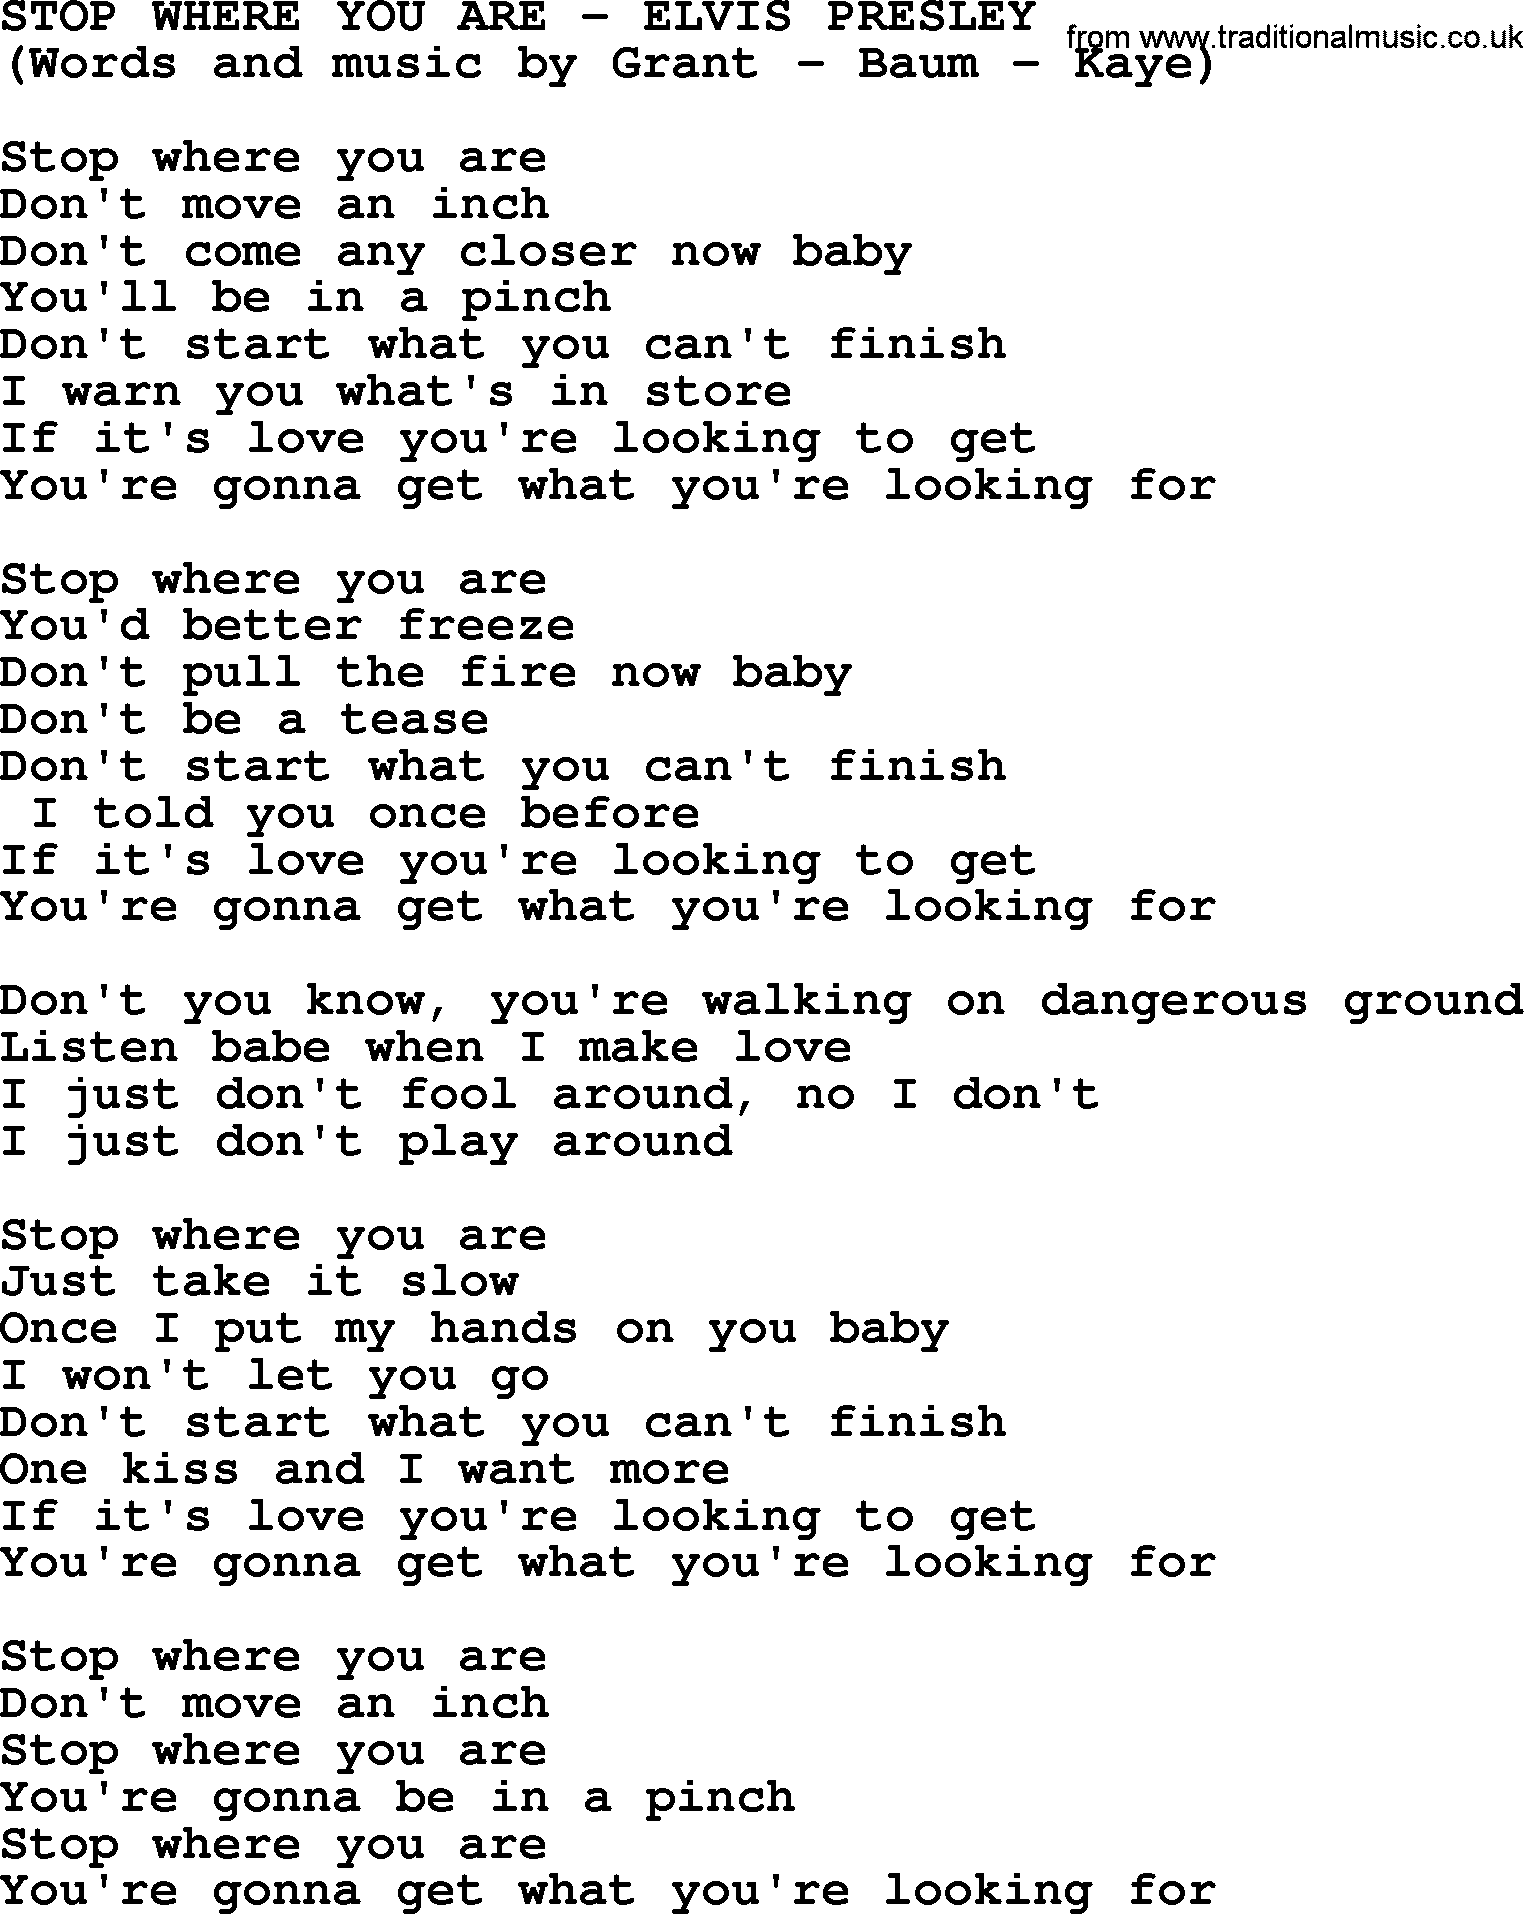 Elvis Presley song: Stop Where You Are lyrics